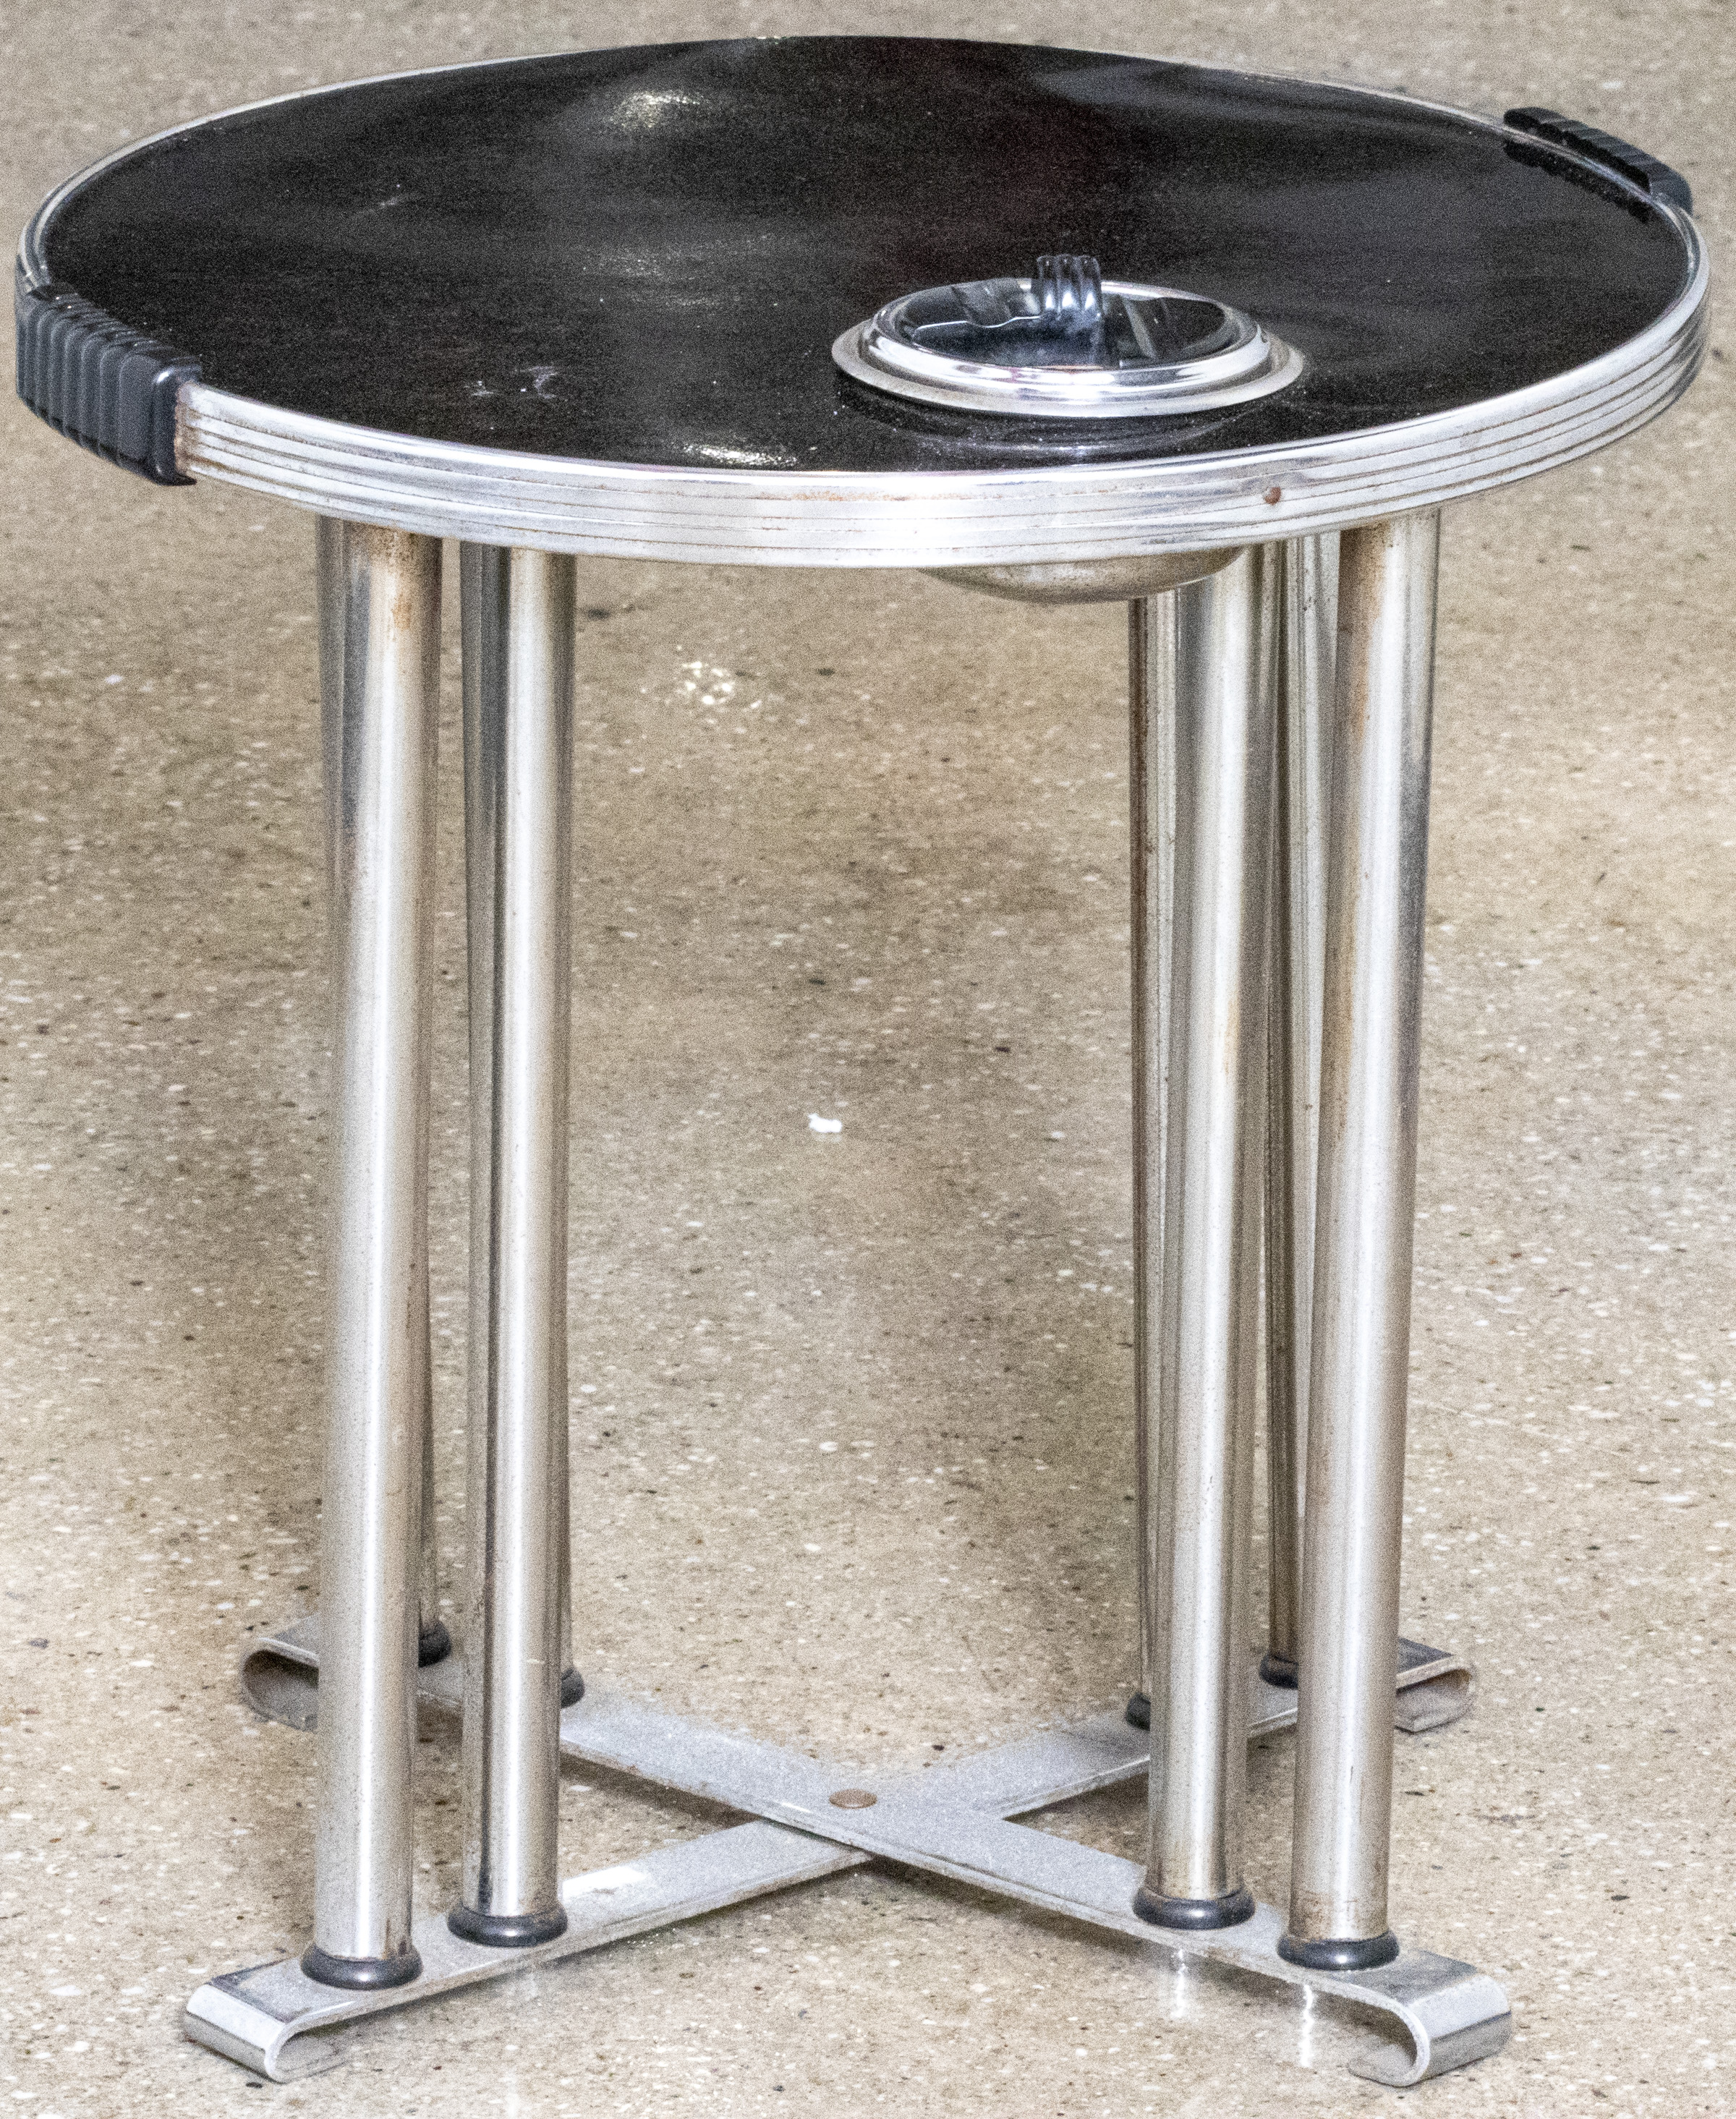 ART DECO SMOKER S COCKTAIL TABLE 363f8a